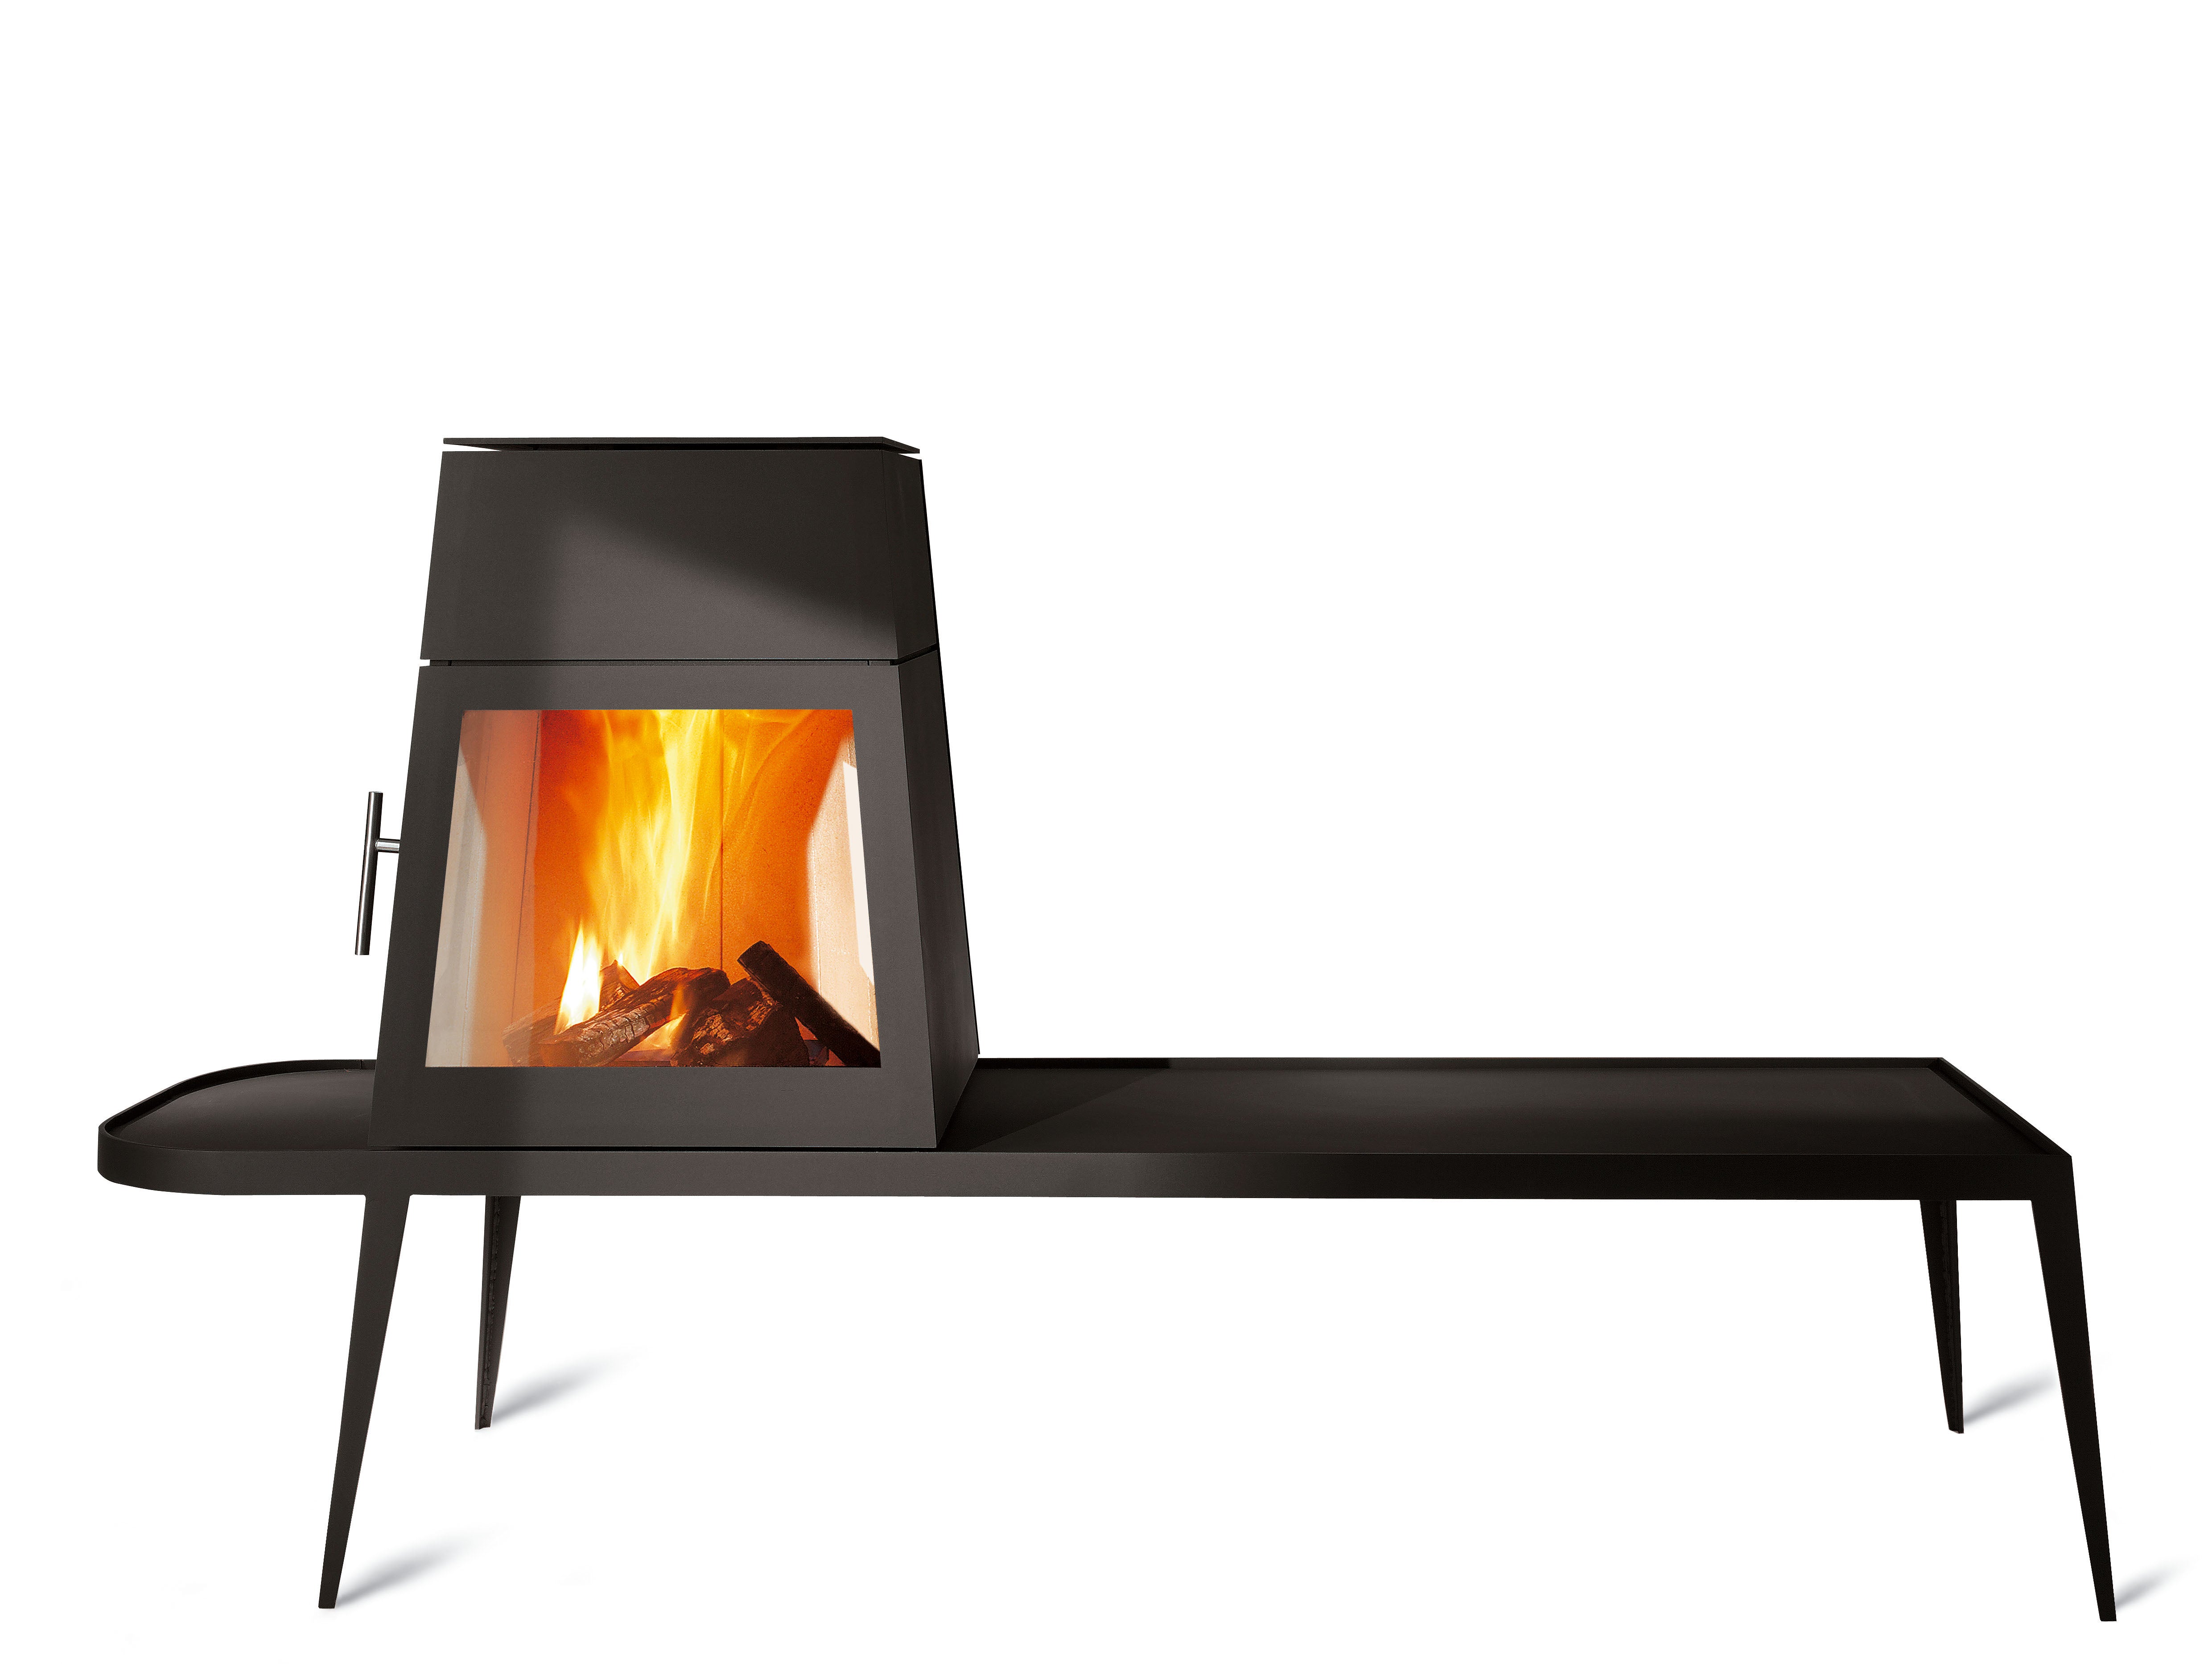 Modern Shaker Style wood-burning stove in black cast iron with long side bench